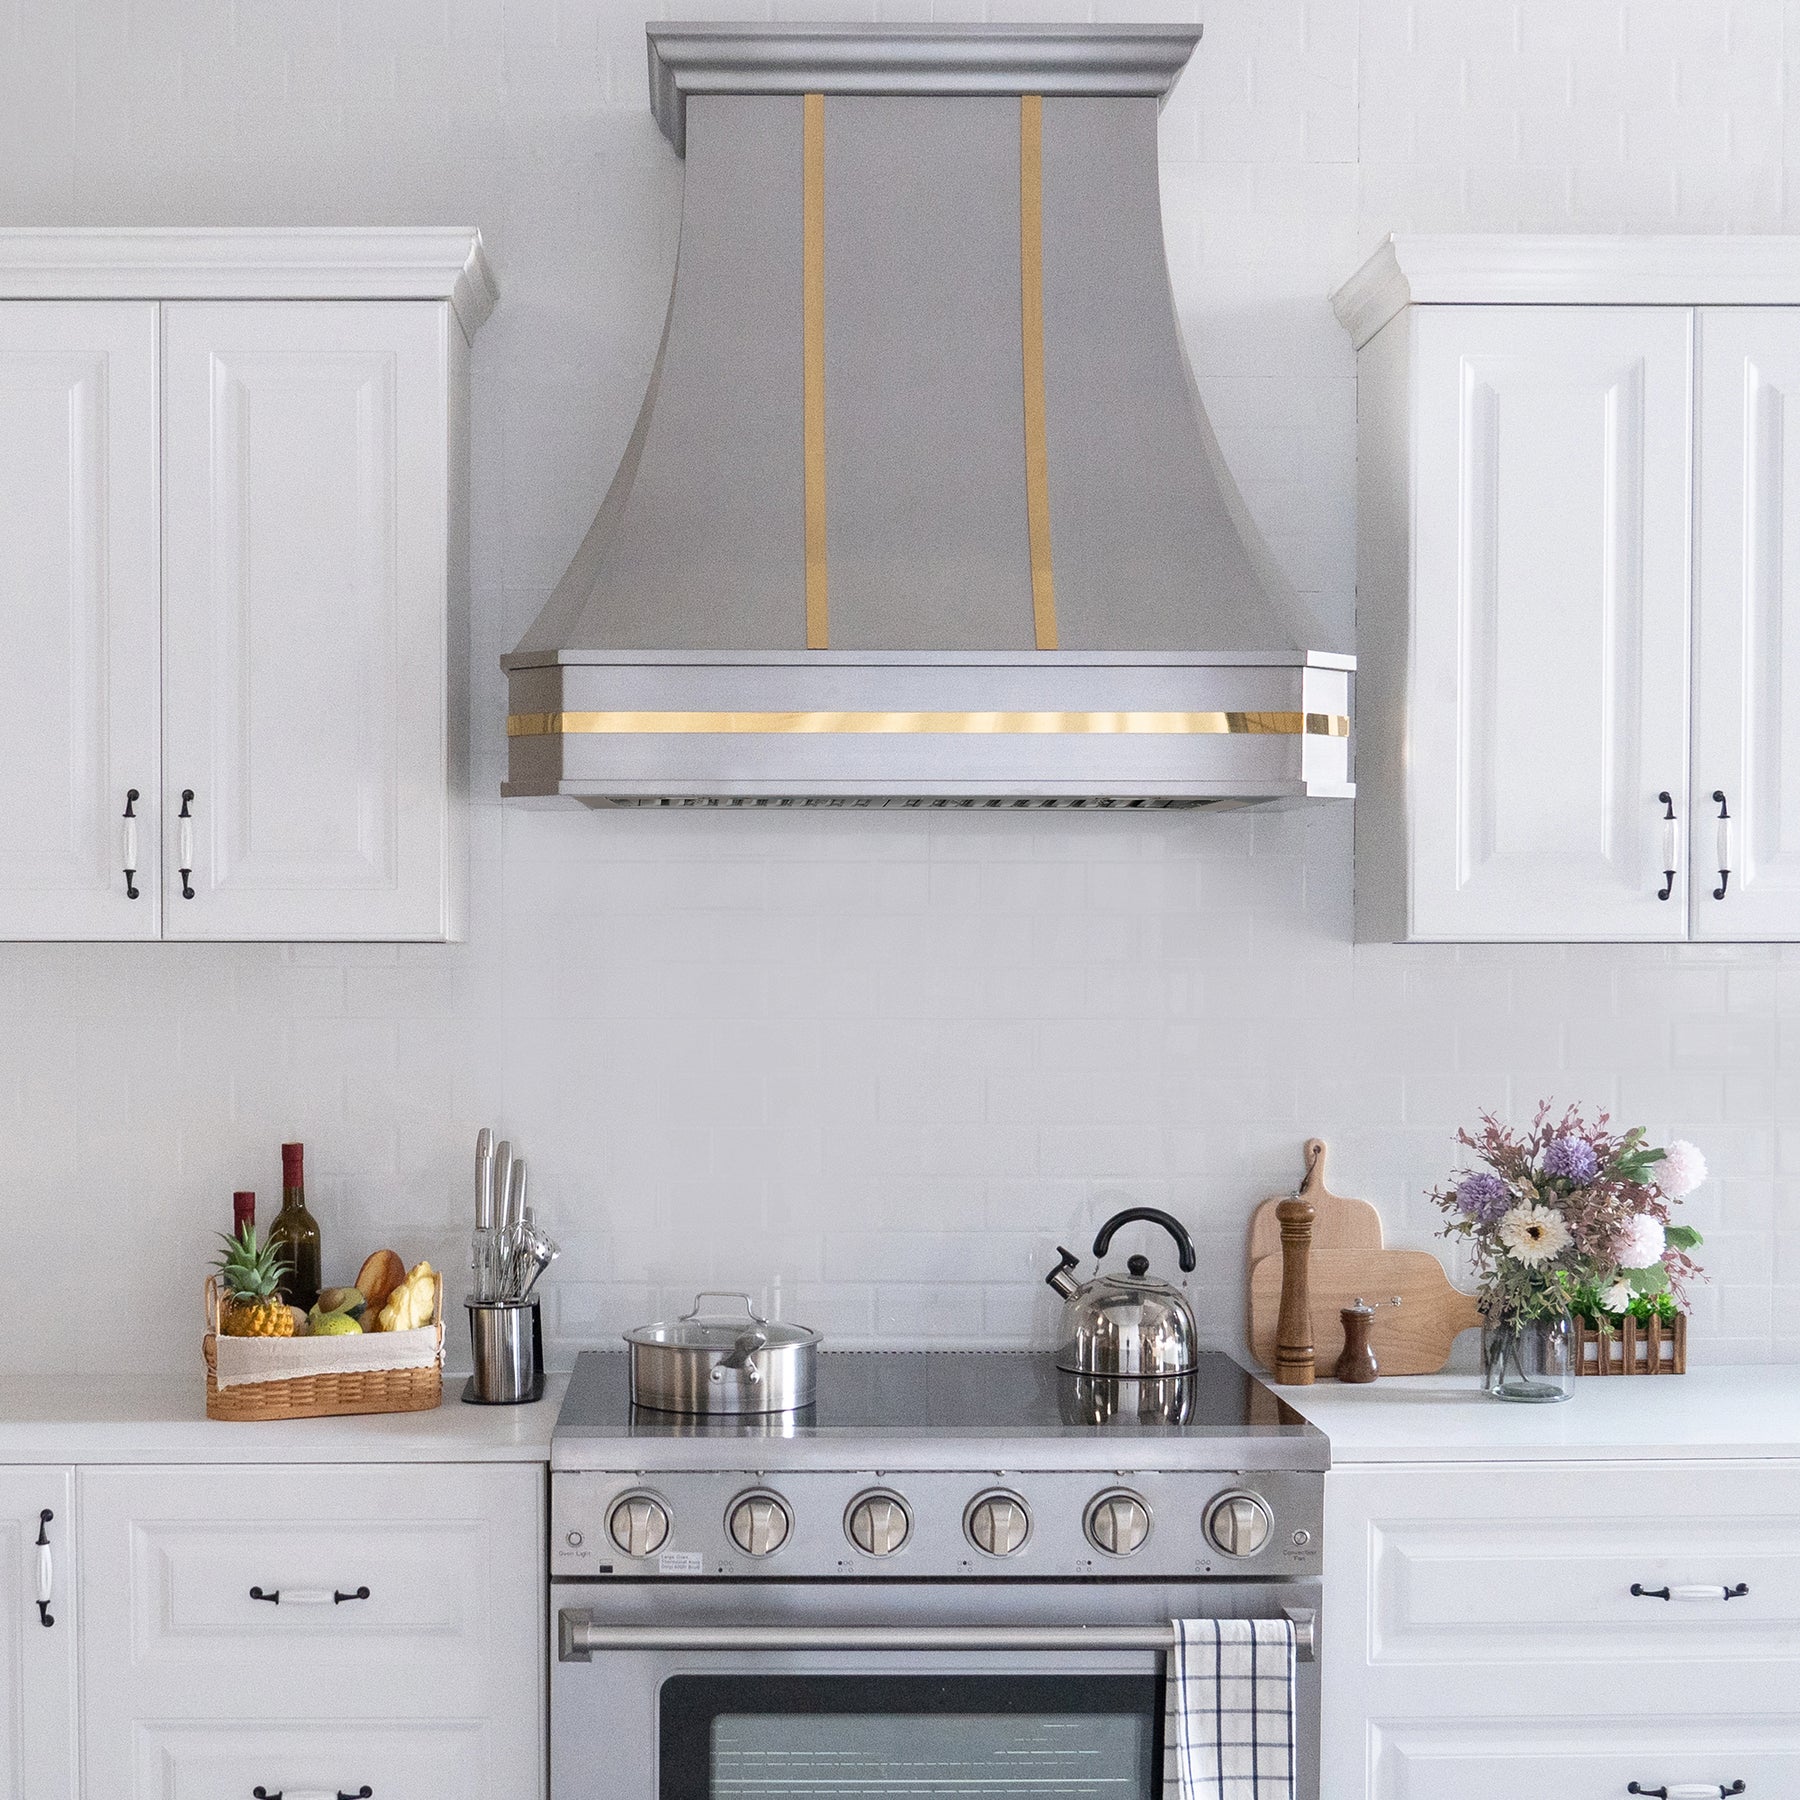 fobest brushed stainless steel range hood with polished brass straps